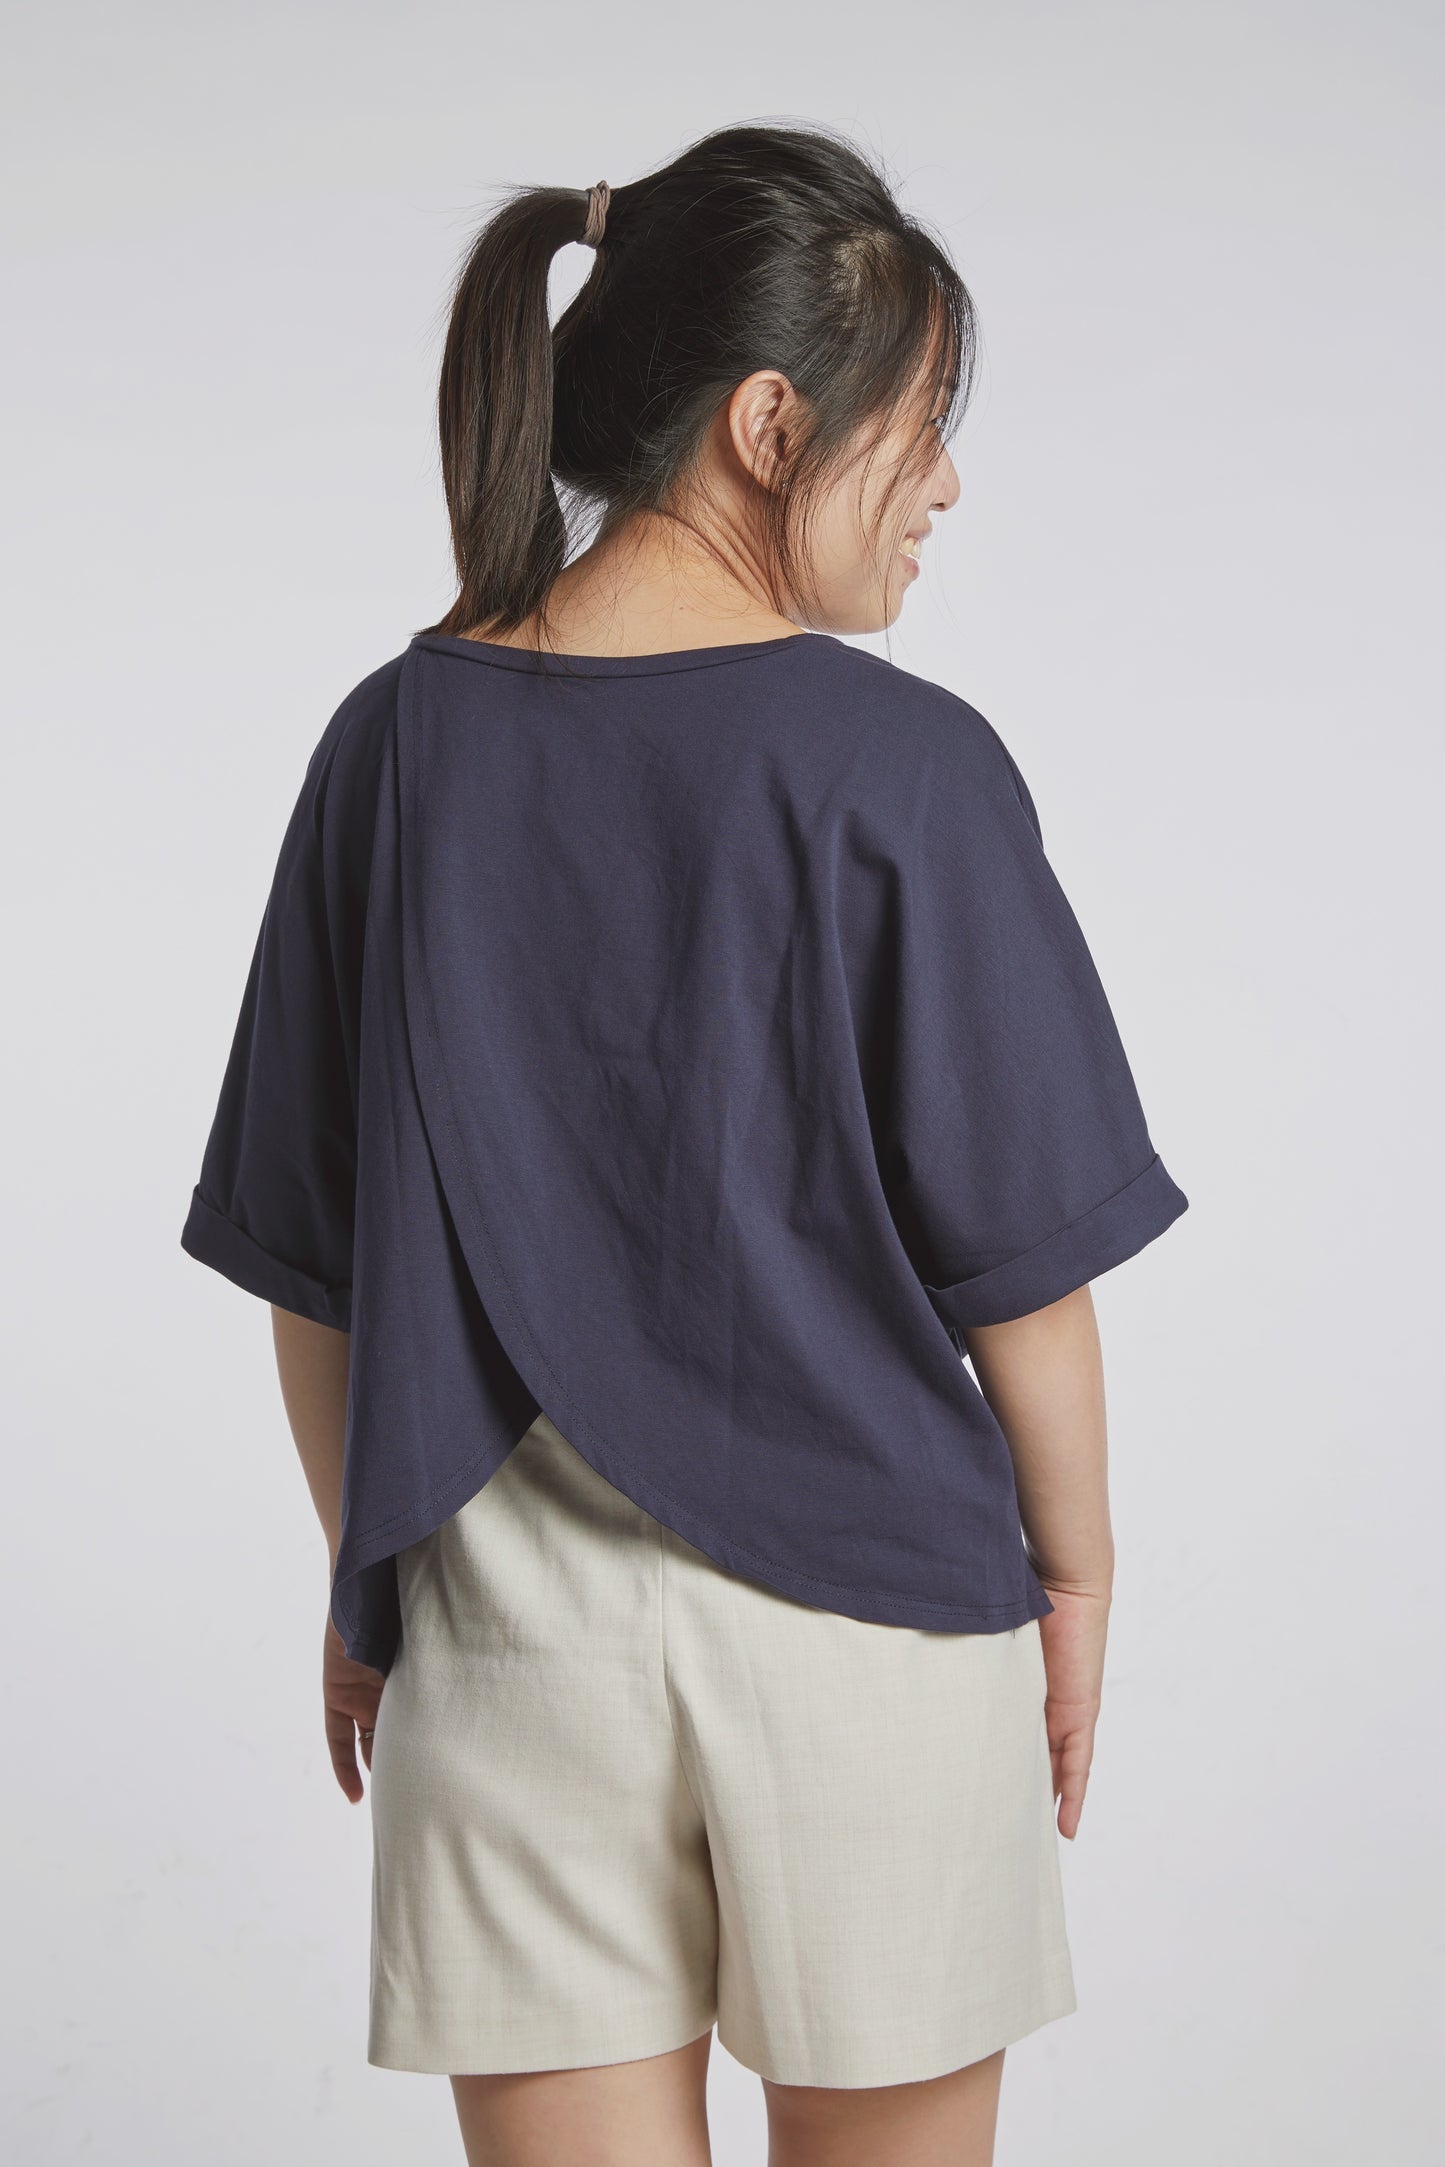 [New XL Size!] A Mighty Top In Midnight Blue